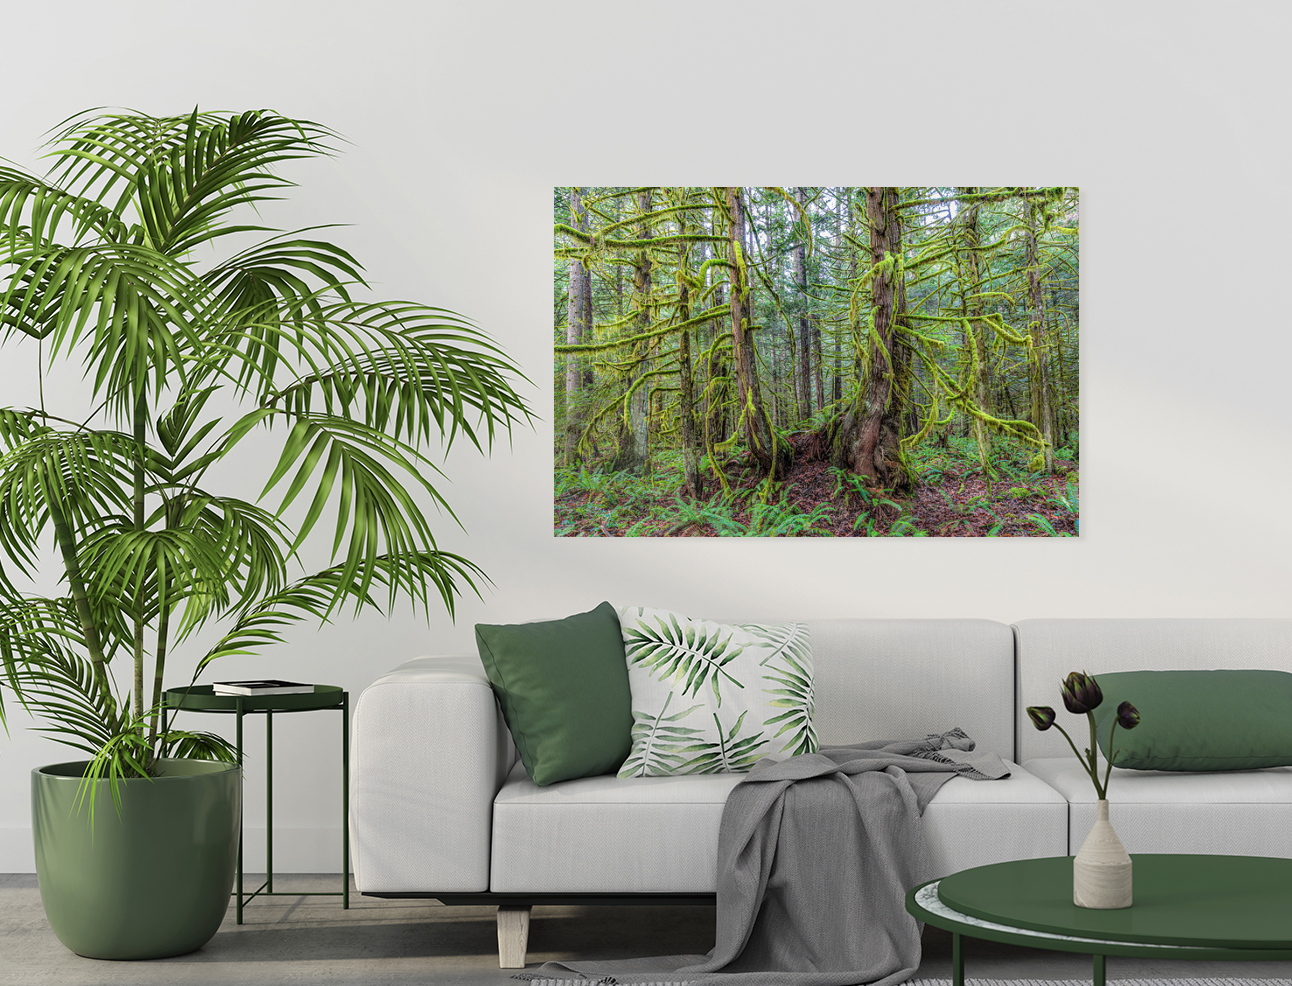 Mossy Forest 40x60"